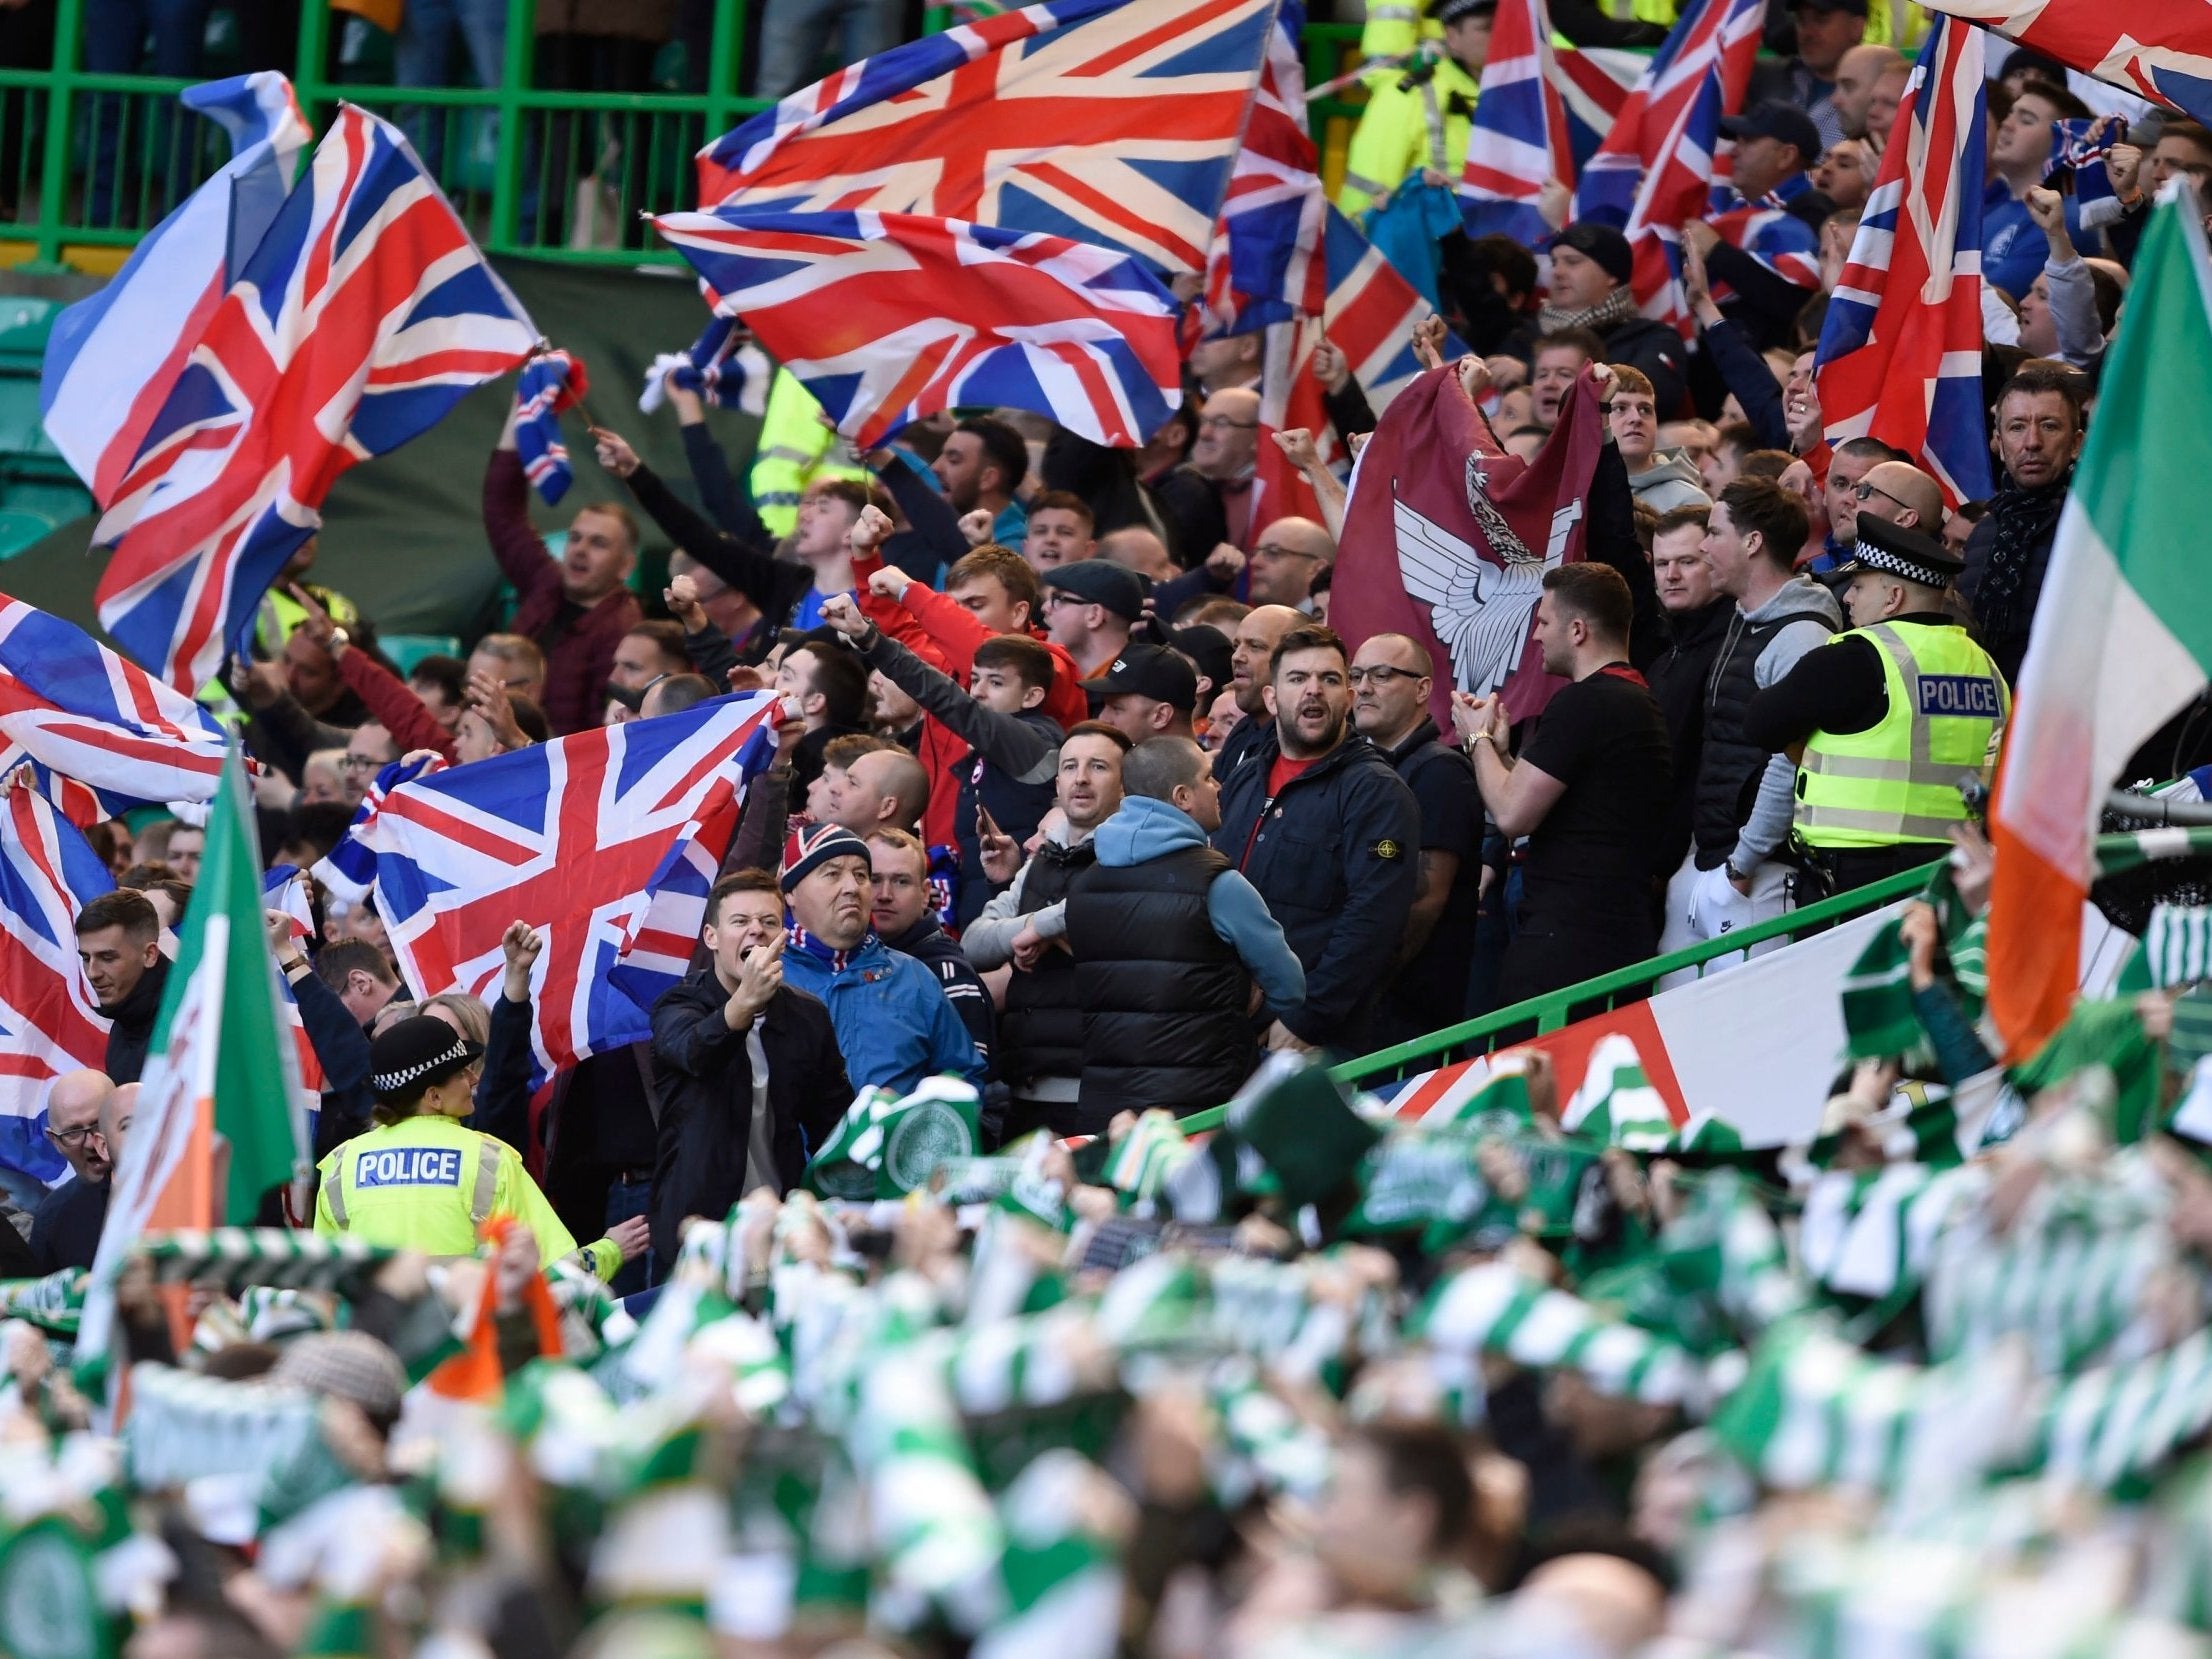 Rangers and Celtic fans at Celtic Park on Sunday